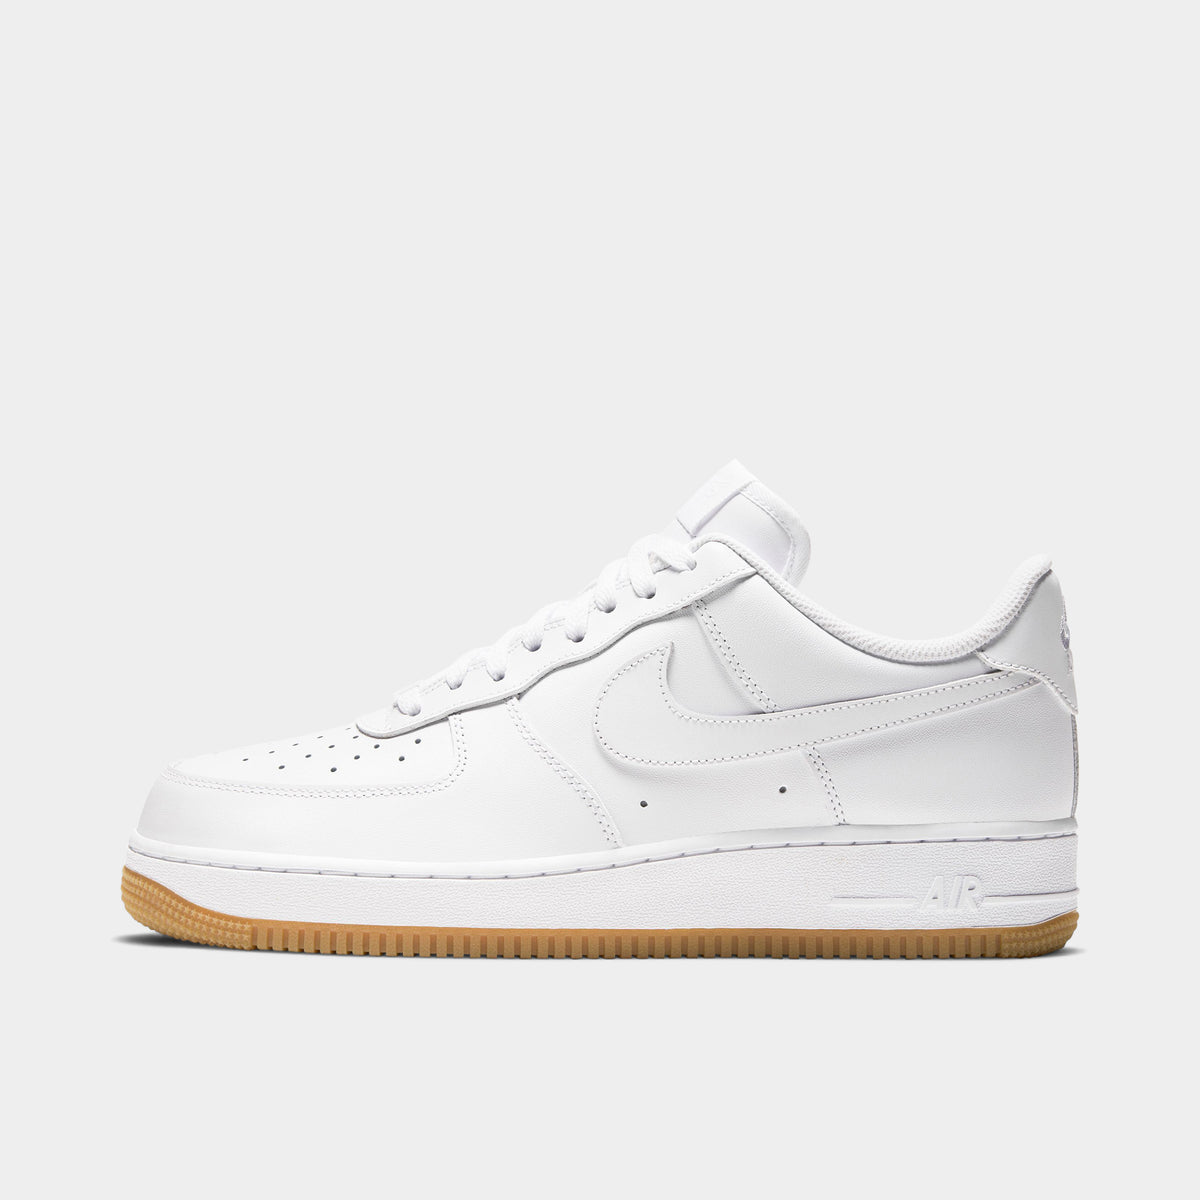 white and black air forces with gum bottoms